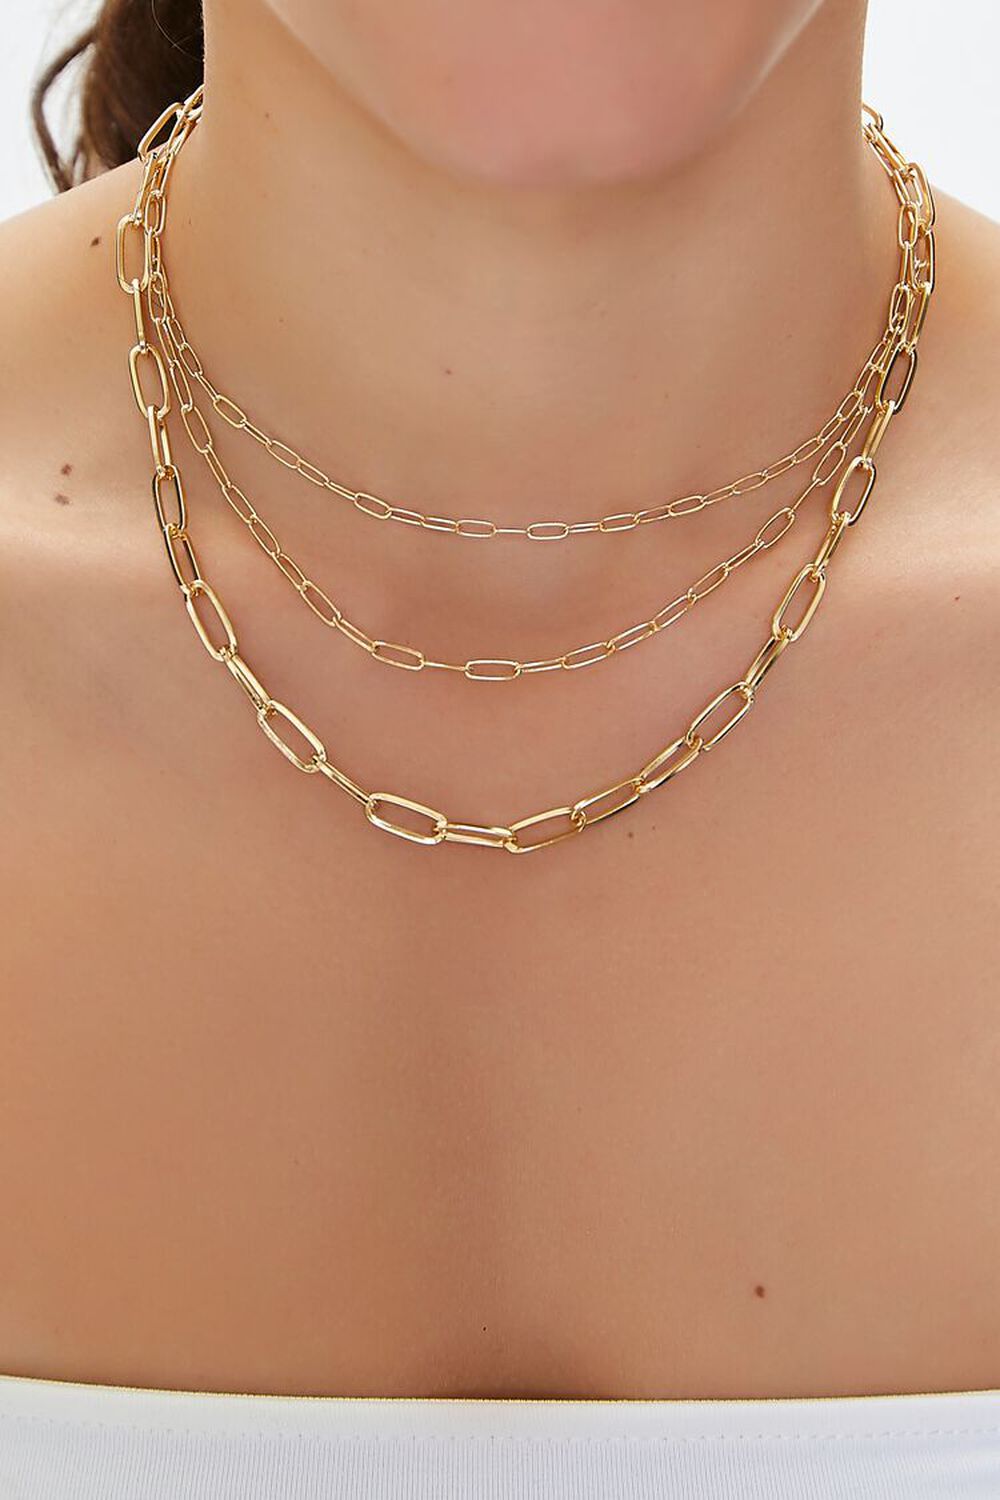 GOLD Anchor Chain Layered Necklace, image 1